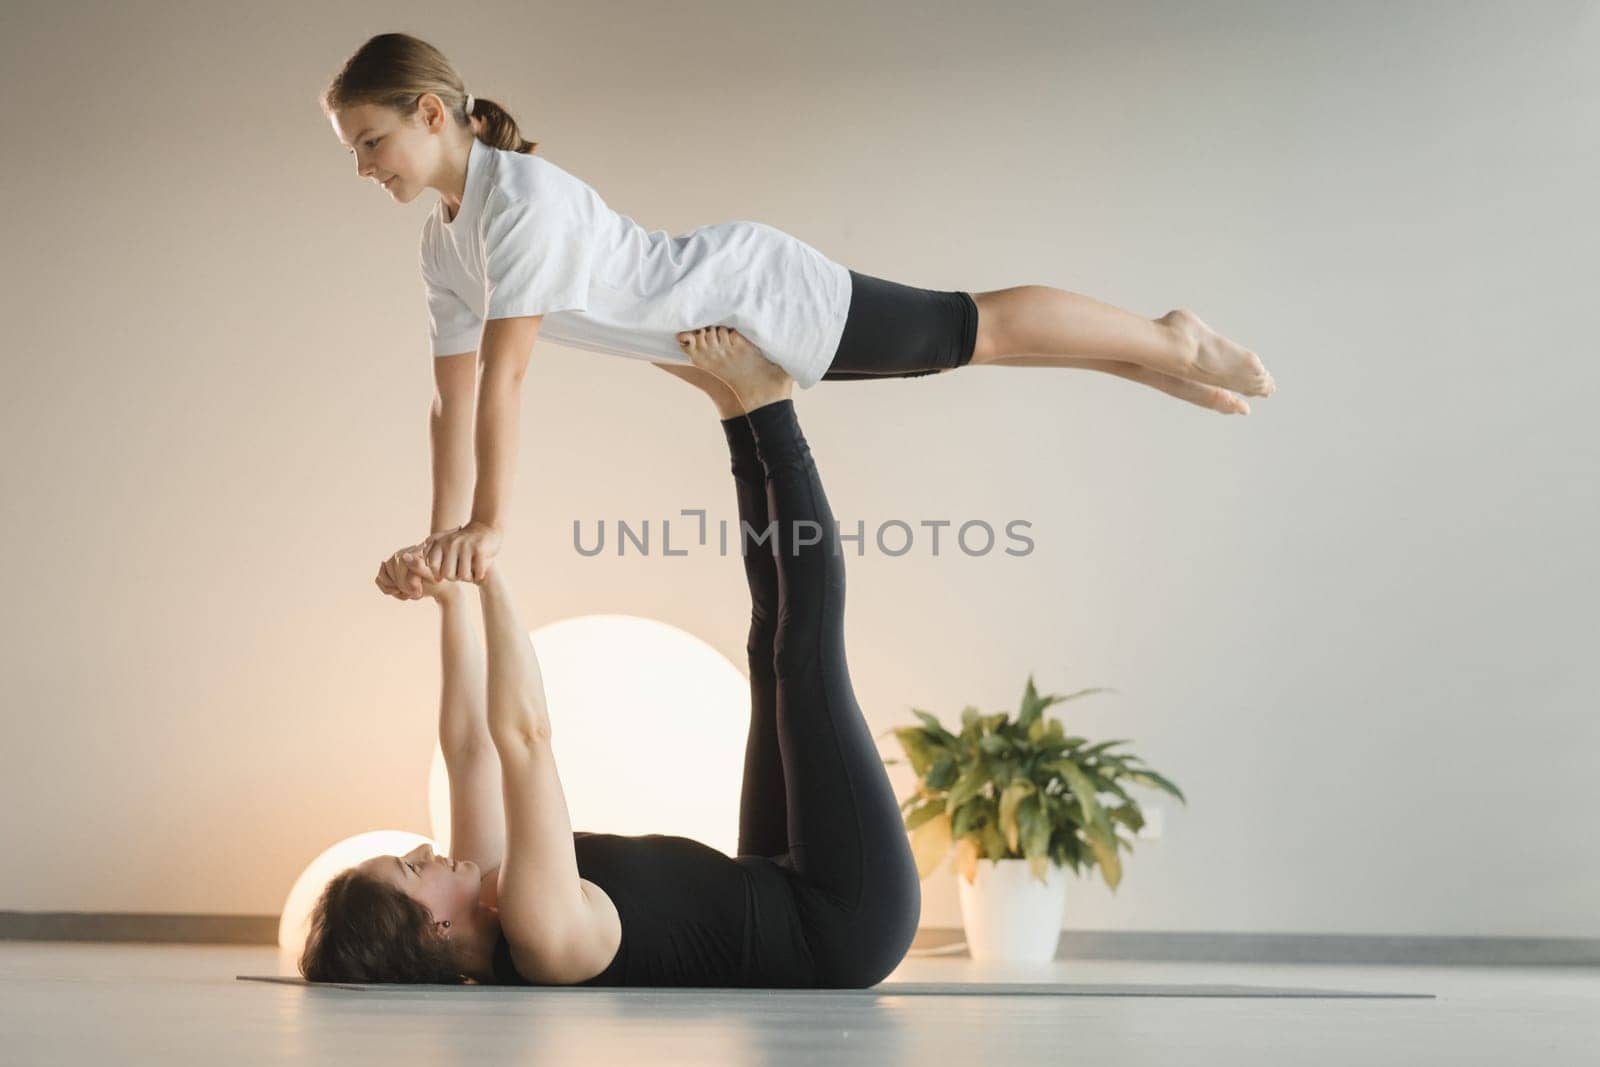 Mom and teenage daughter do gymnastics together in the fitness room. A woman and a girl train in the gym.